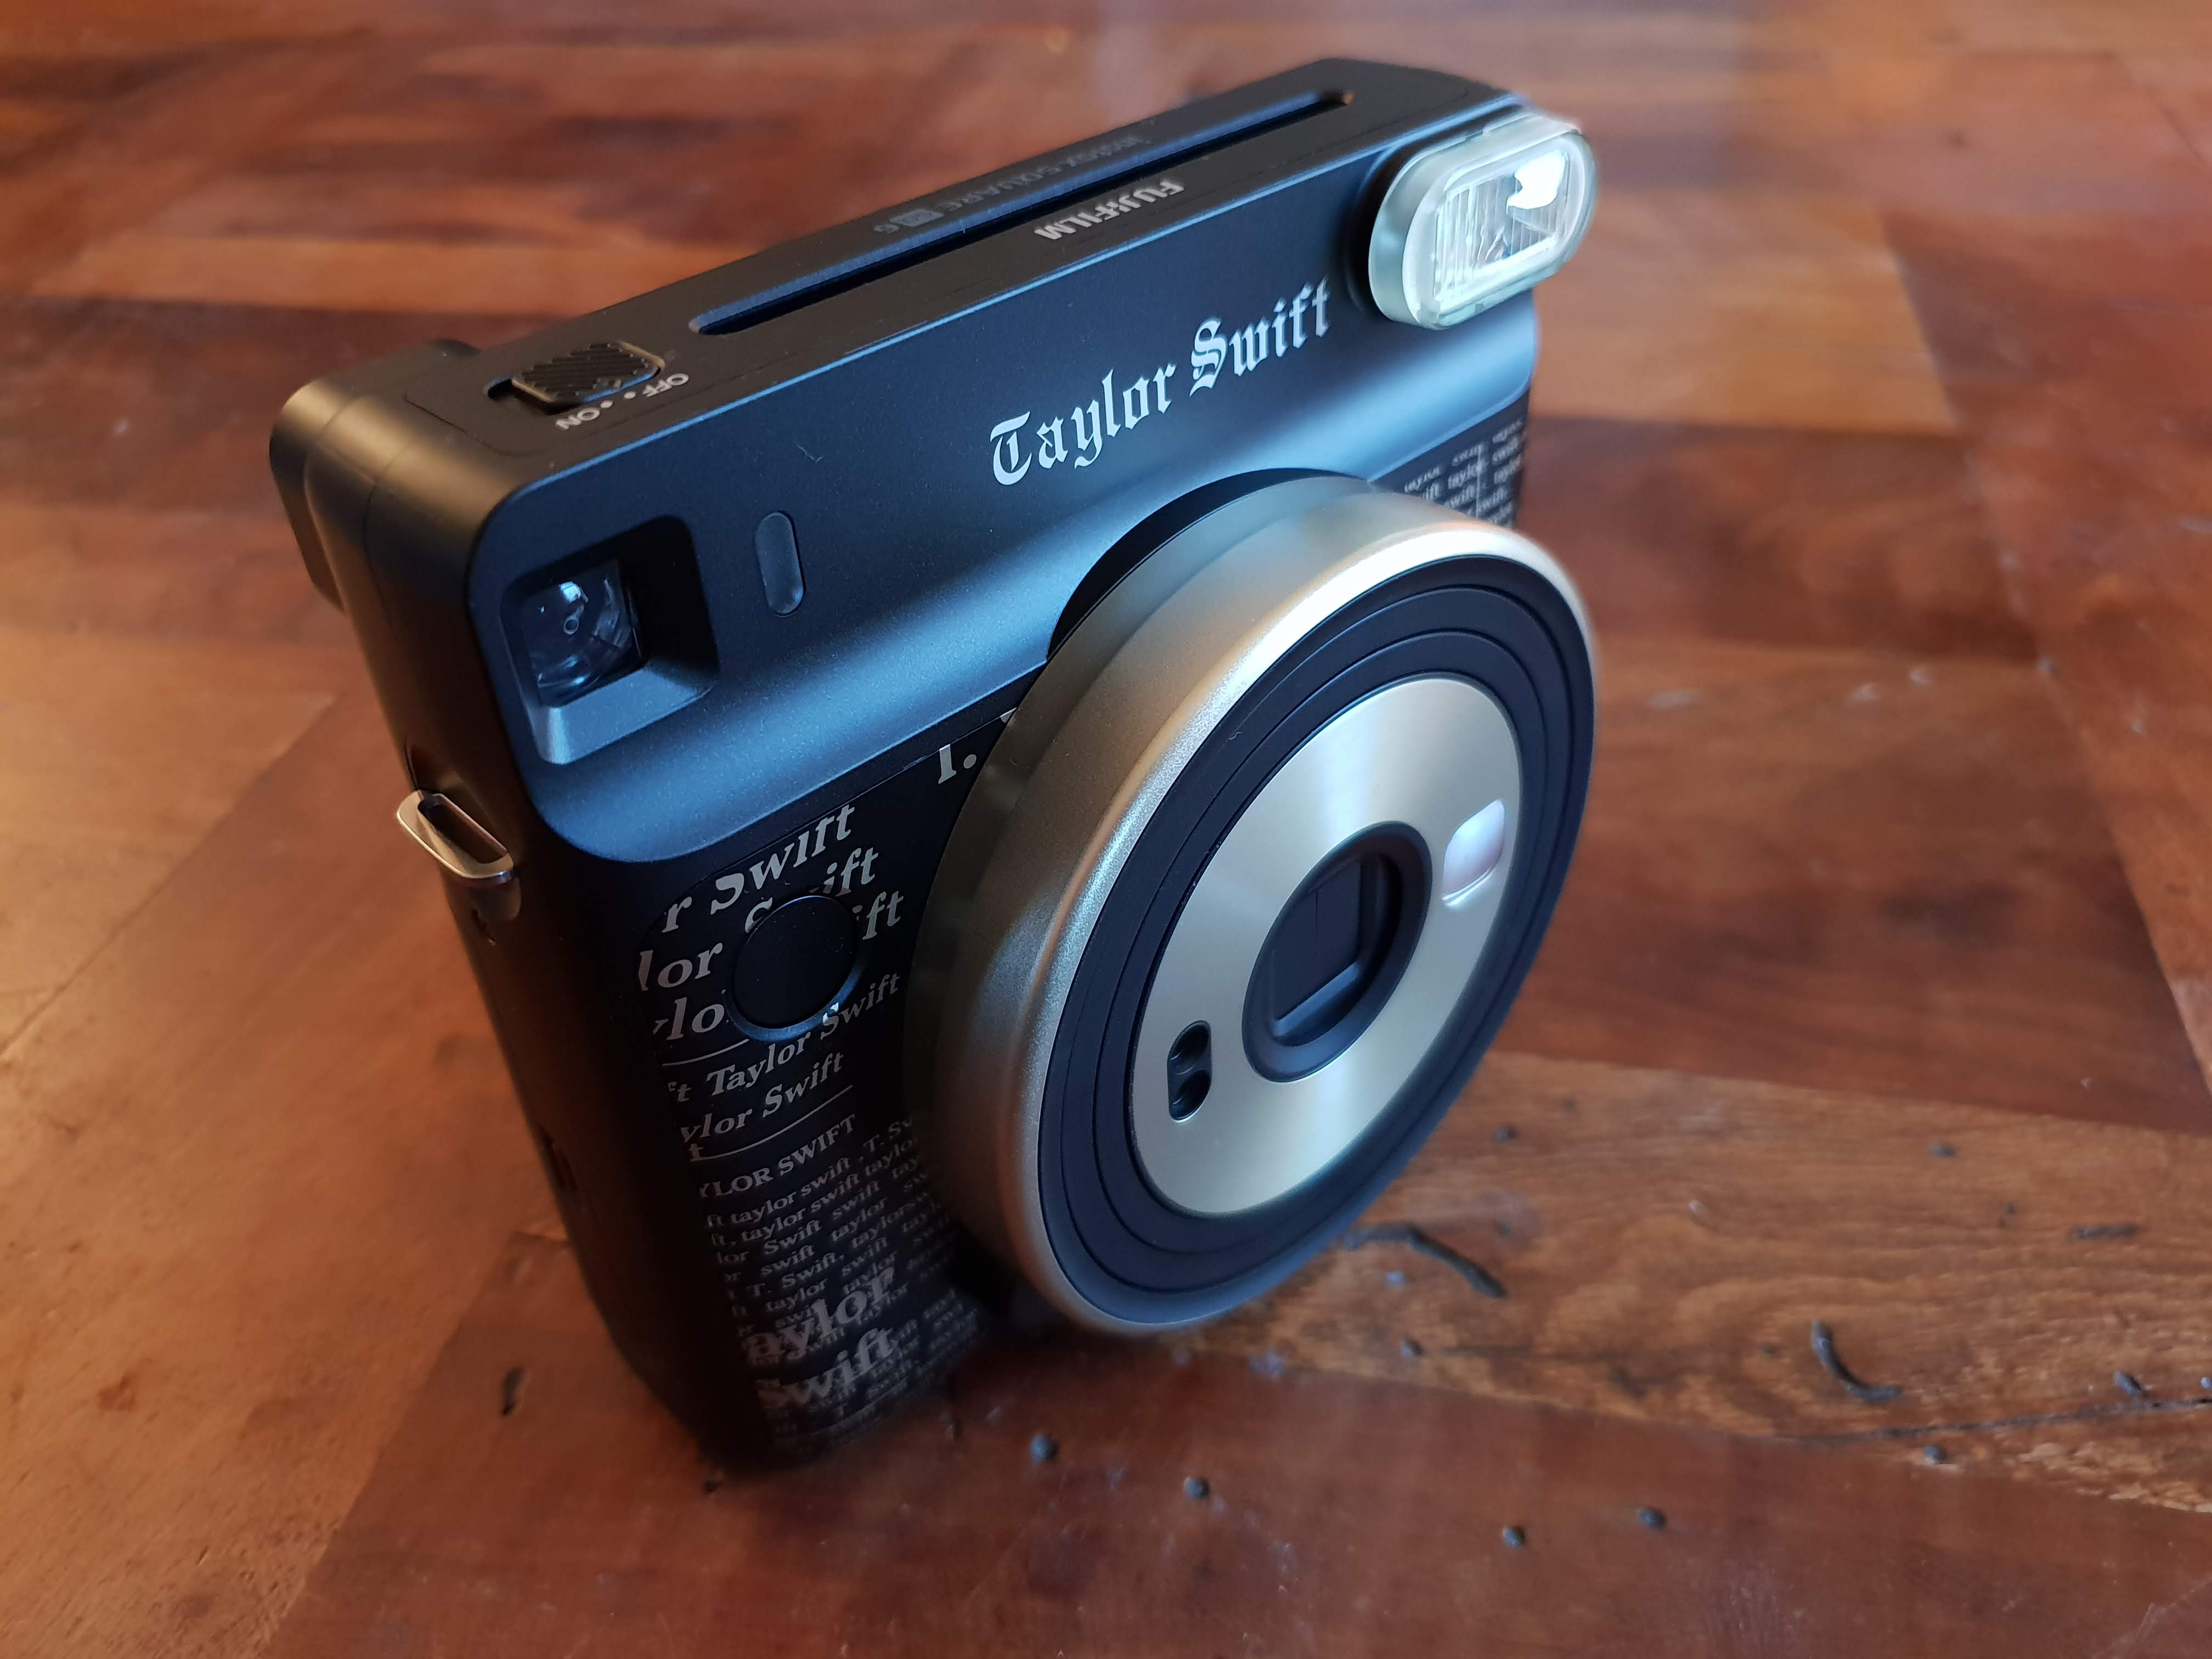 Fujifilm Instax Square SQ6 Taylor Swift Edition Review | Trusted 